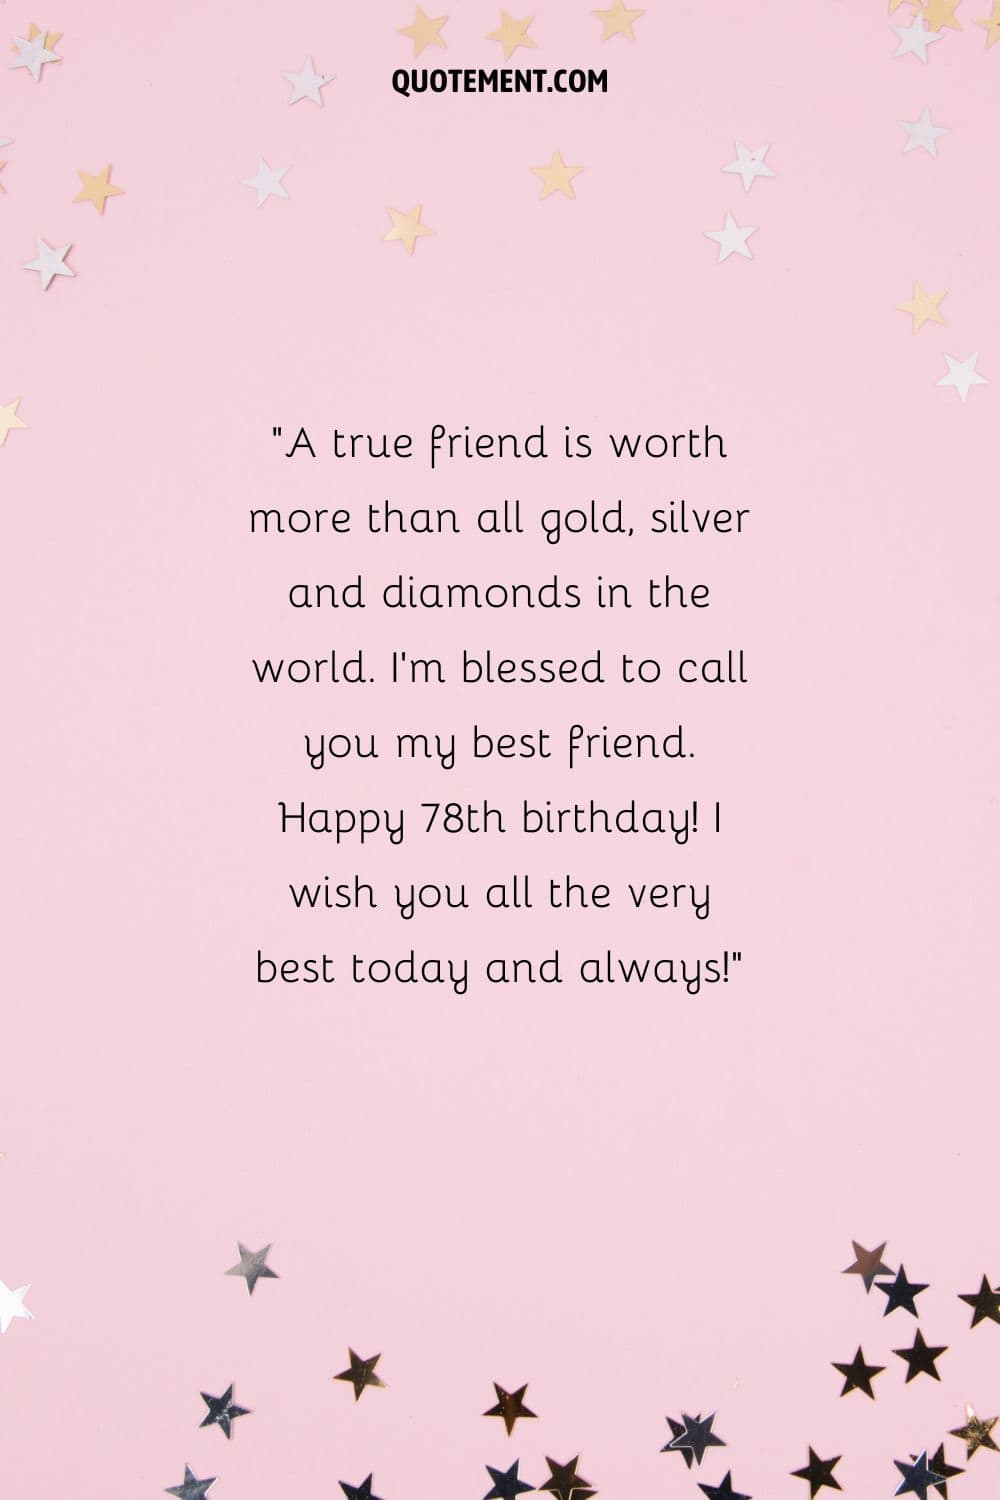 A true friend is worth more than all gold, silver and diamonds in the world.